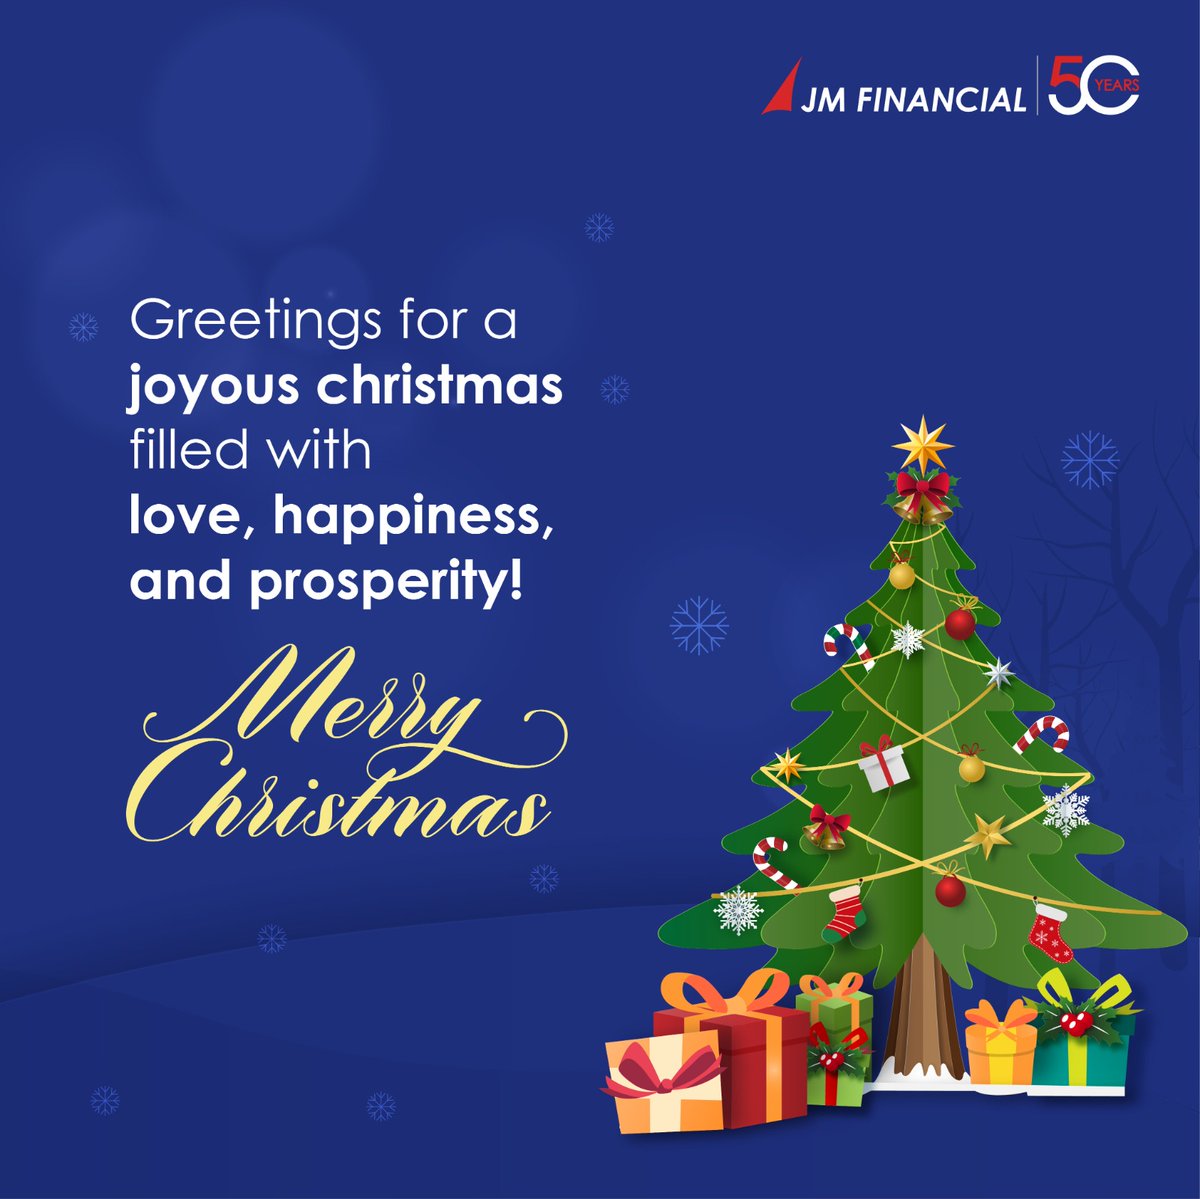 Wishing you and your family Merry Christmas and a very happy and prosperous New Year. 

#JMFinancial #50YearsOfJMFinancial #Christmas2023 #MerryChristmas